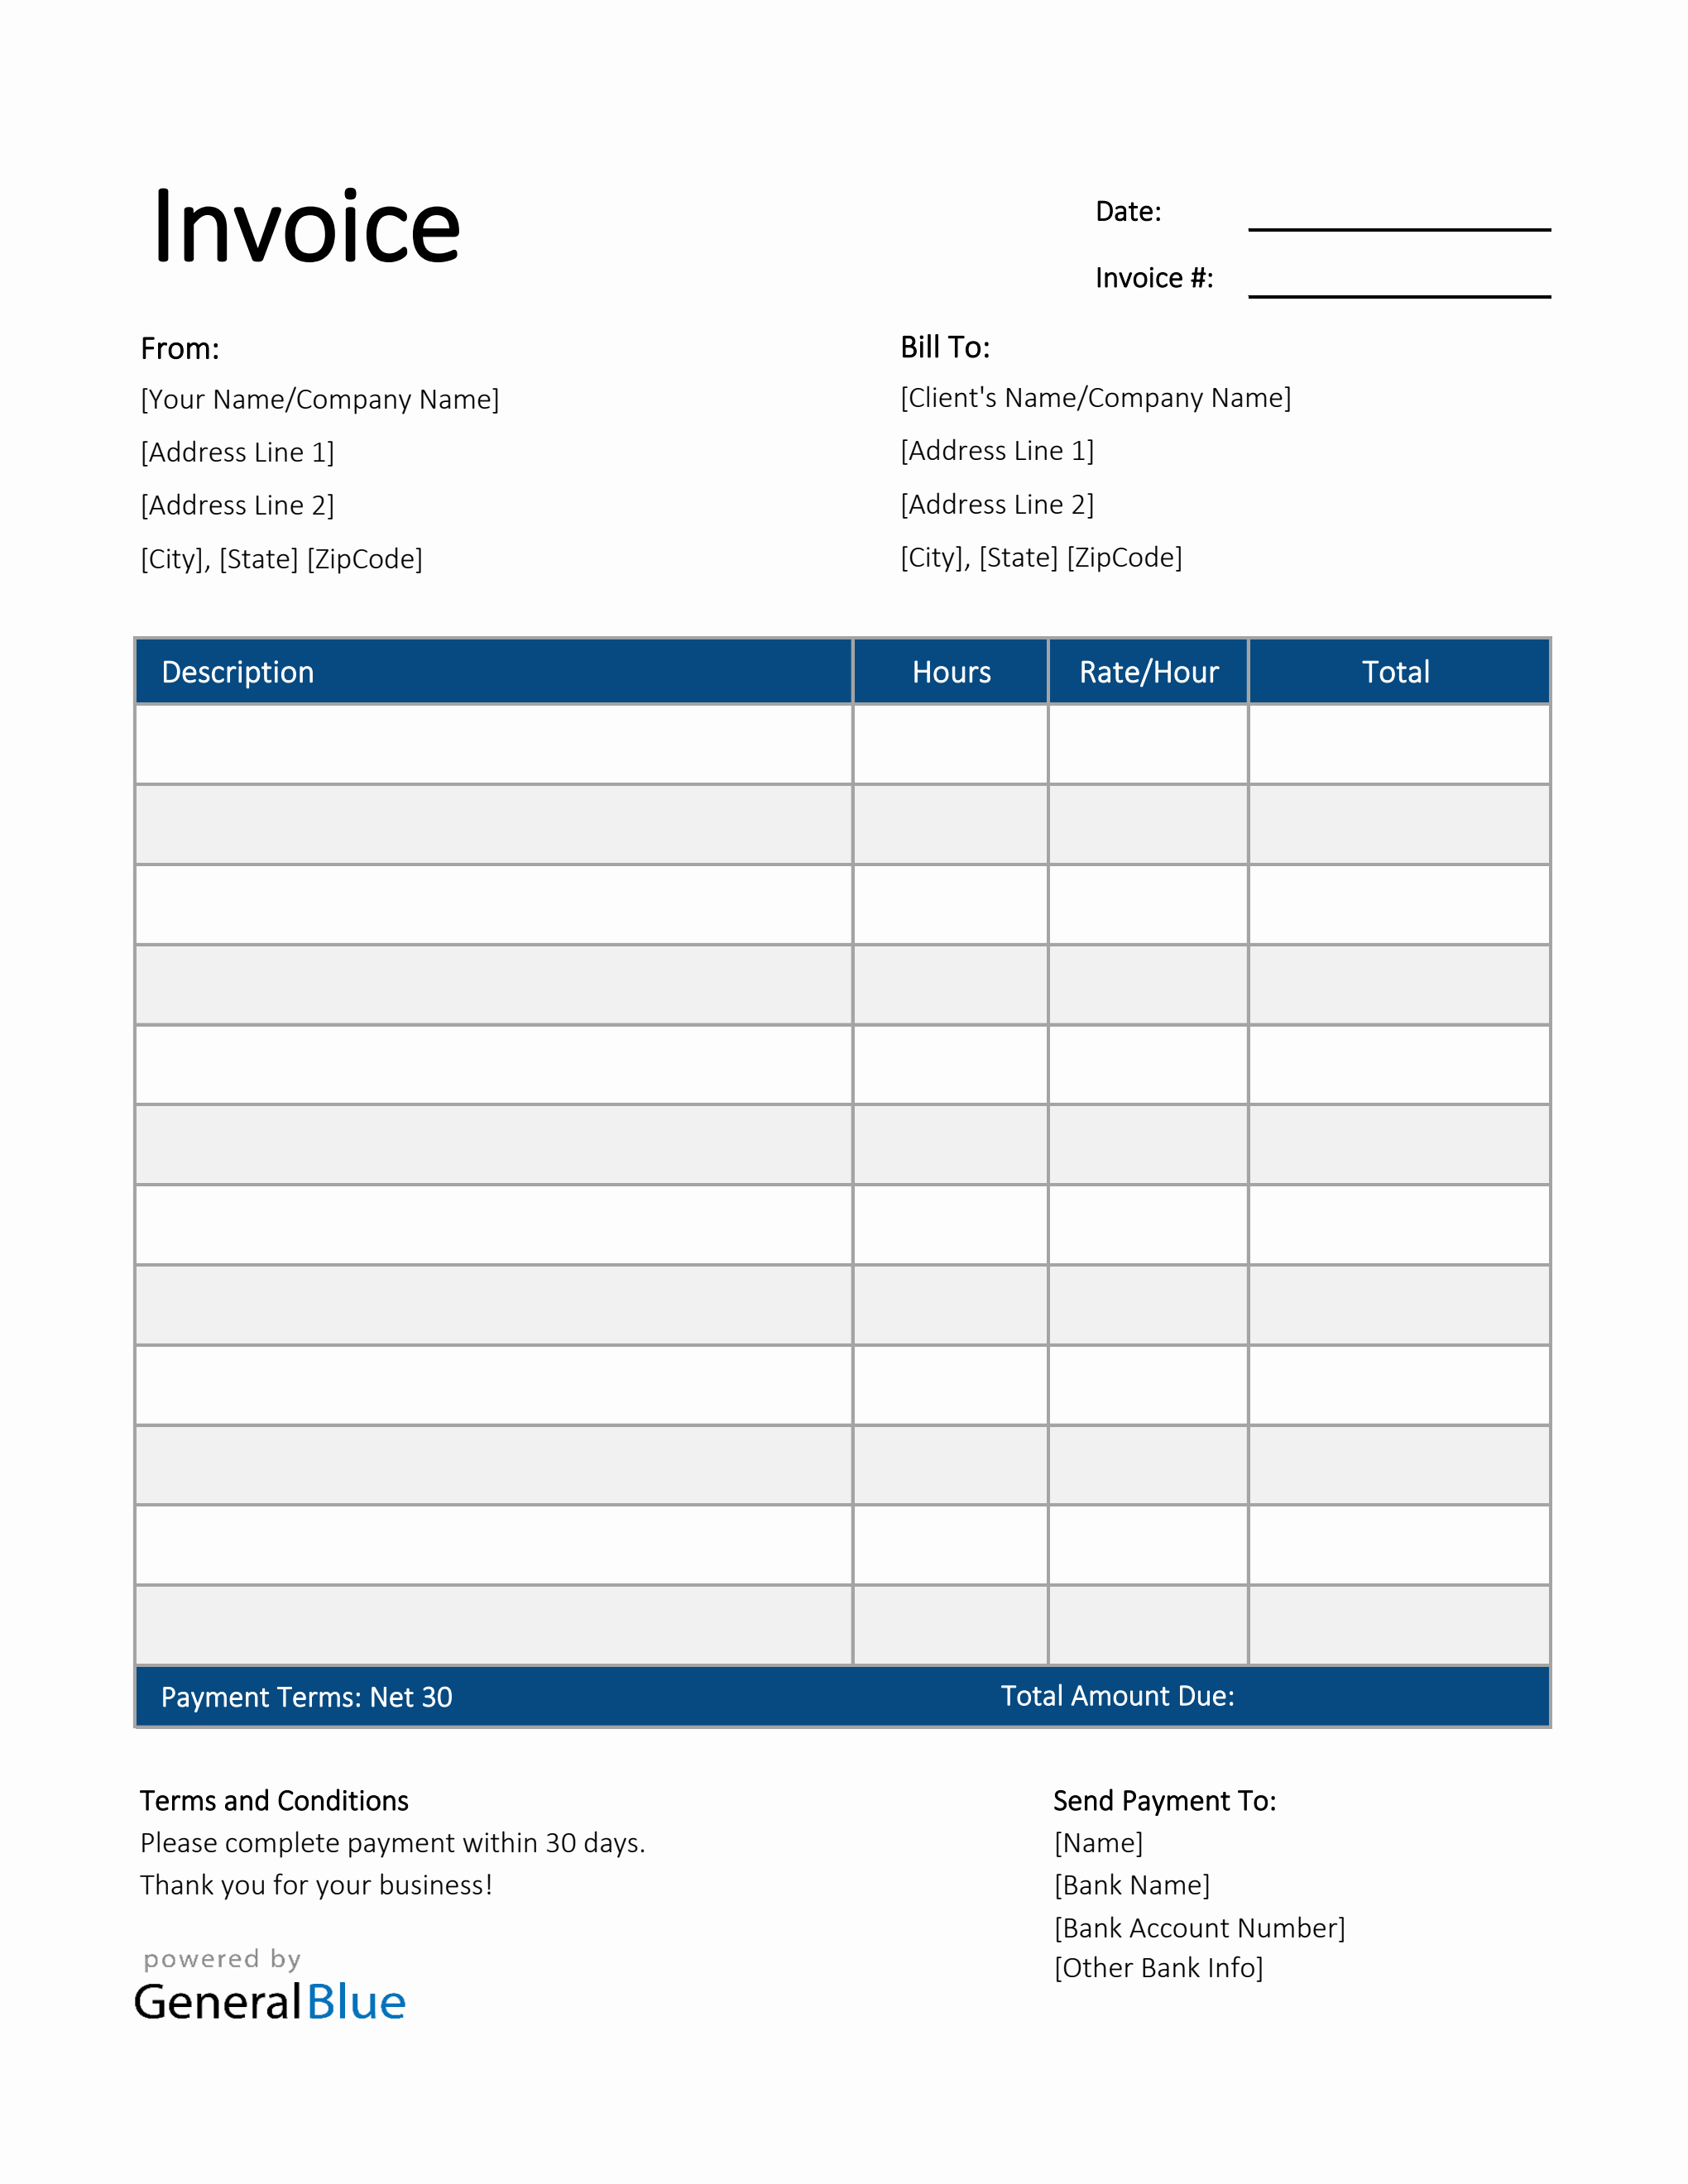 freelance-hourly-invoice-template-in-excel-striped